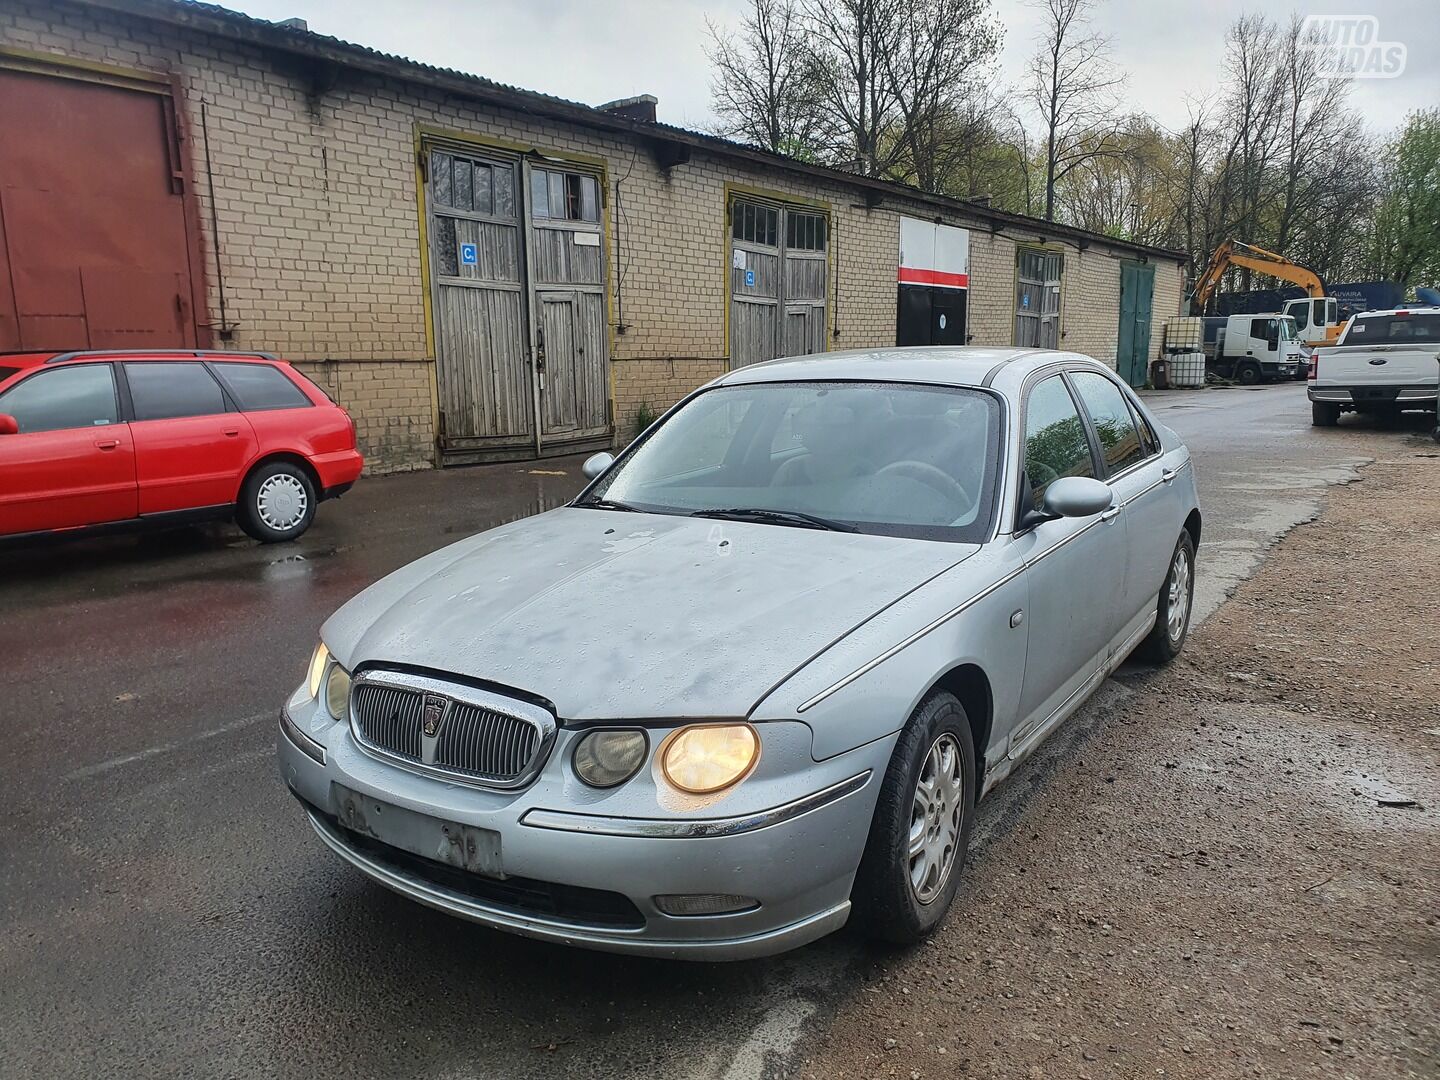 Rover 75 2.0 DYZELIS 85 KW 2001 г запчясти